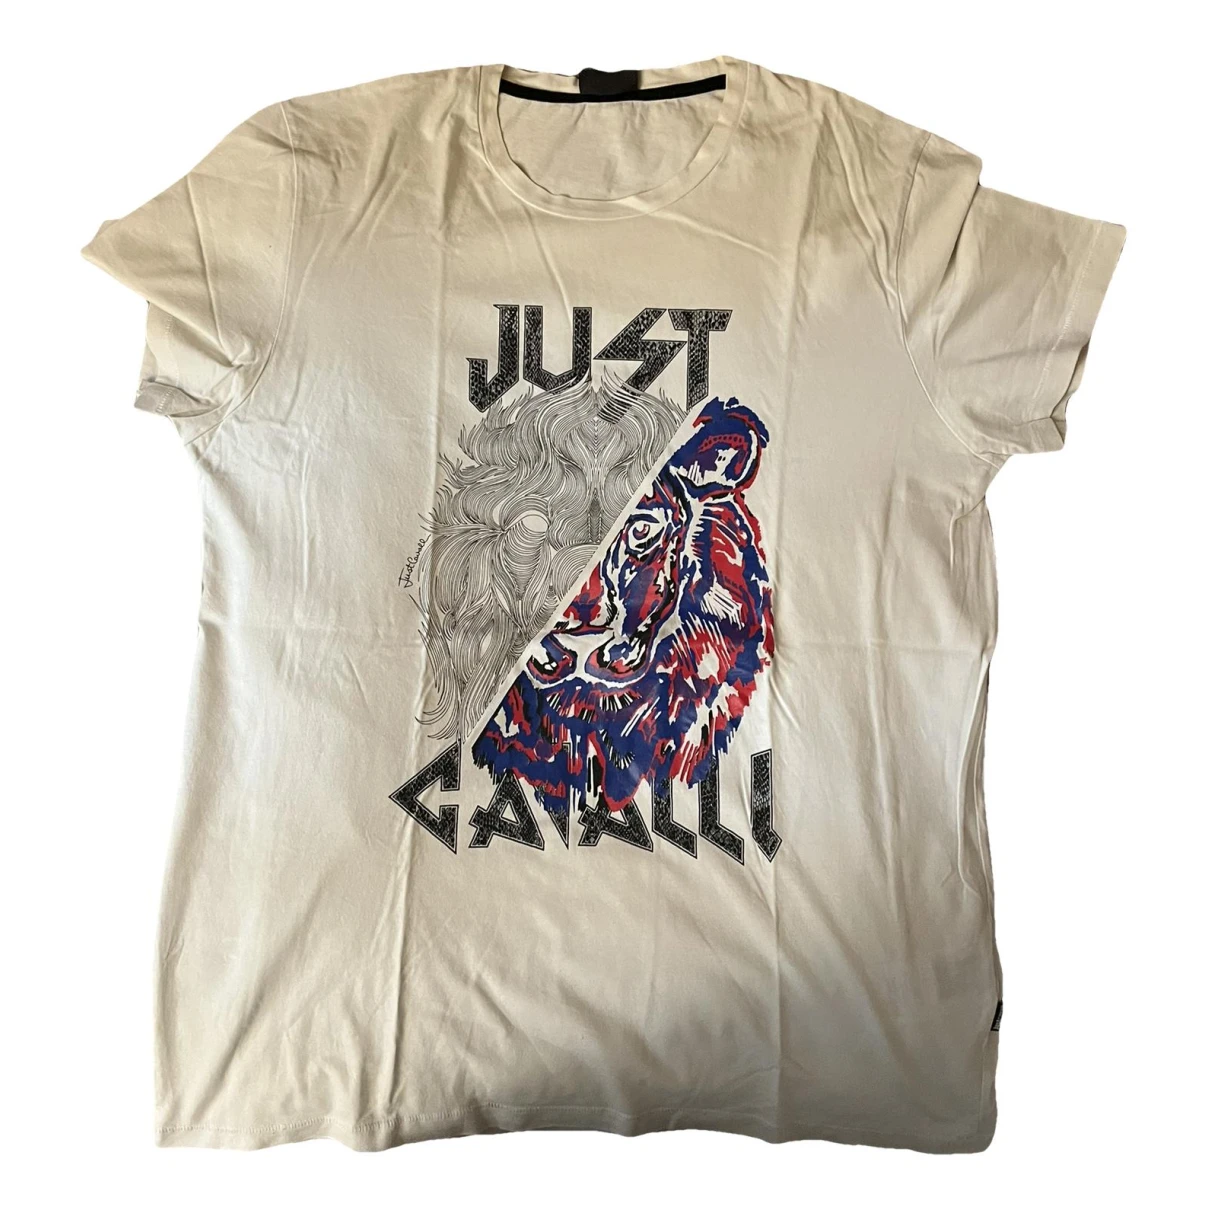 Pre-owned Just Cavalli T-shirt In White